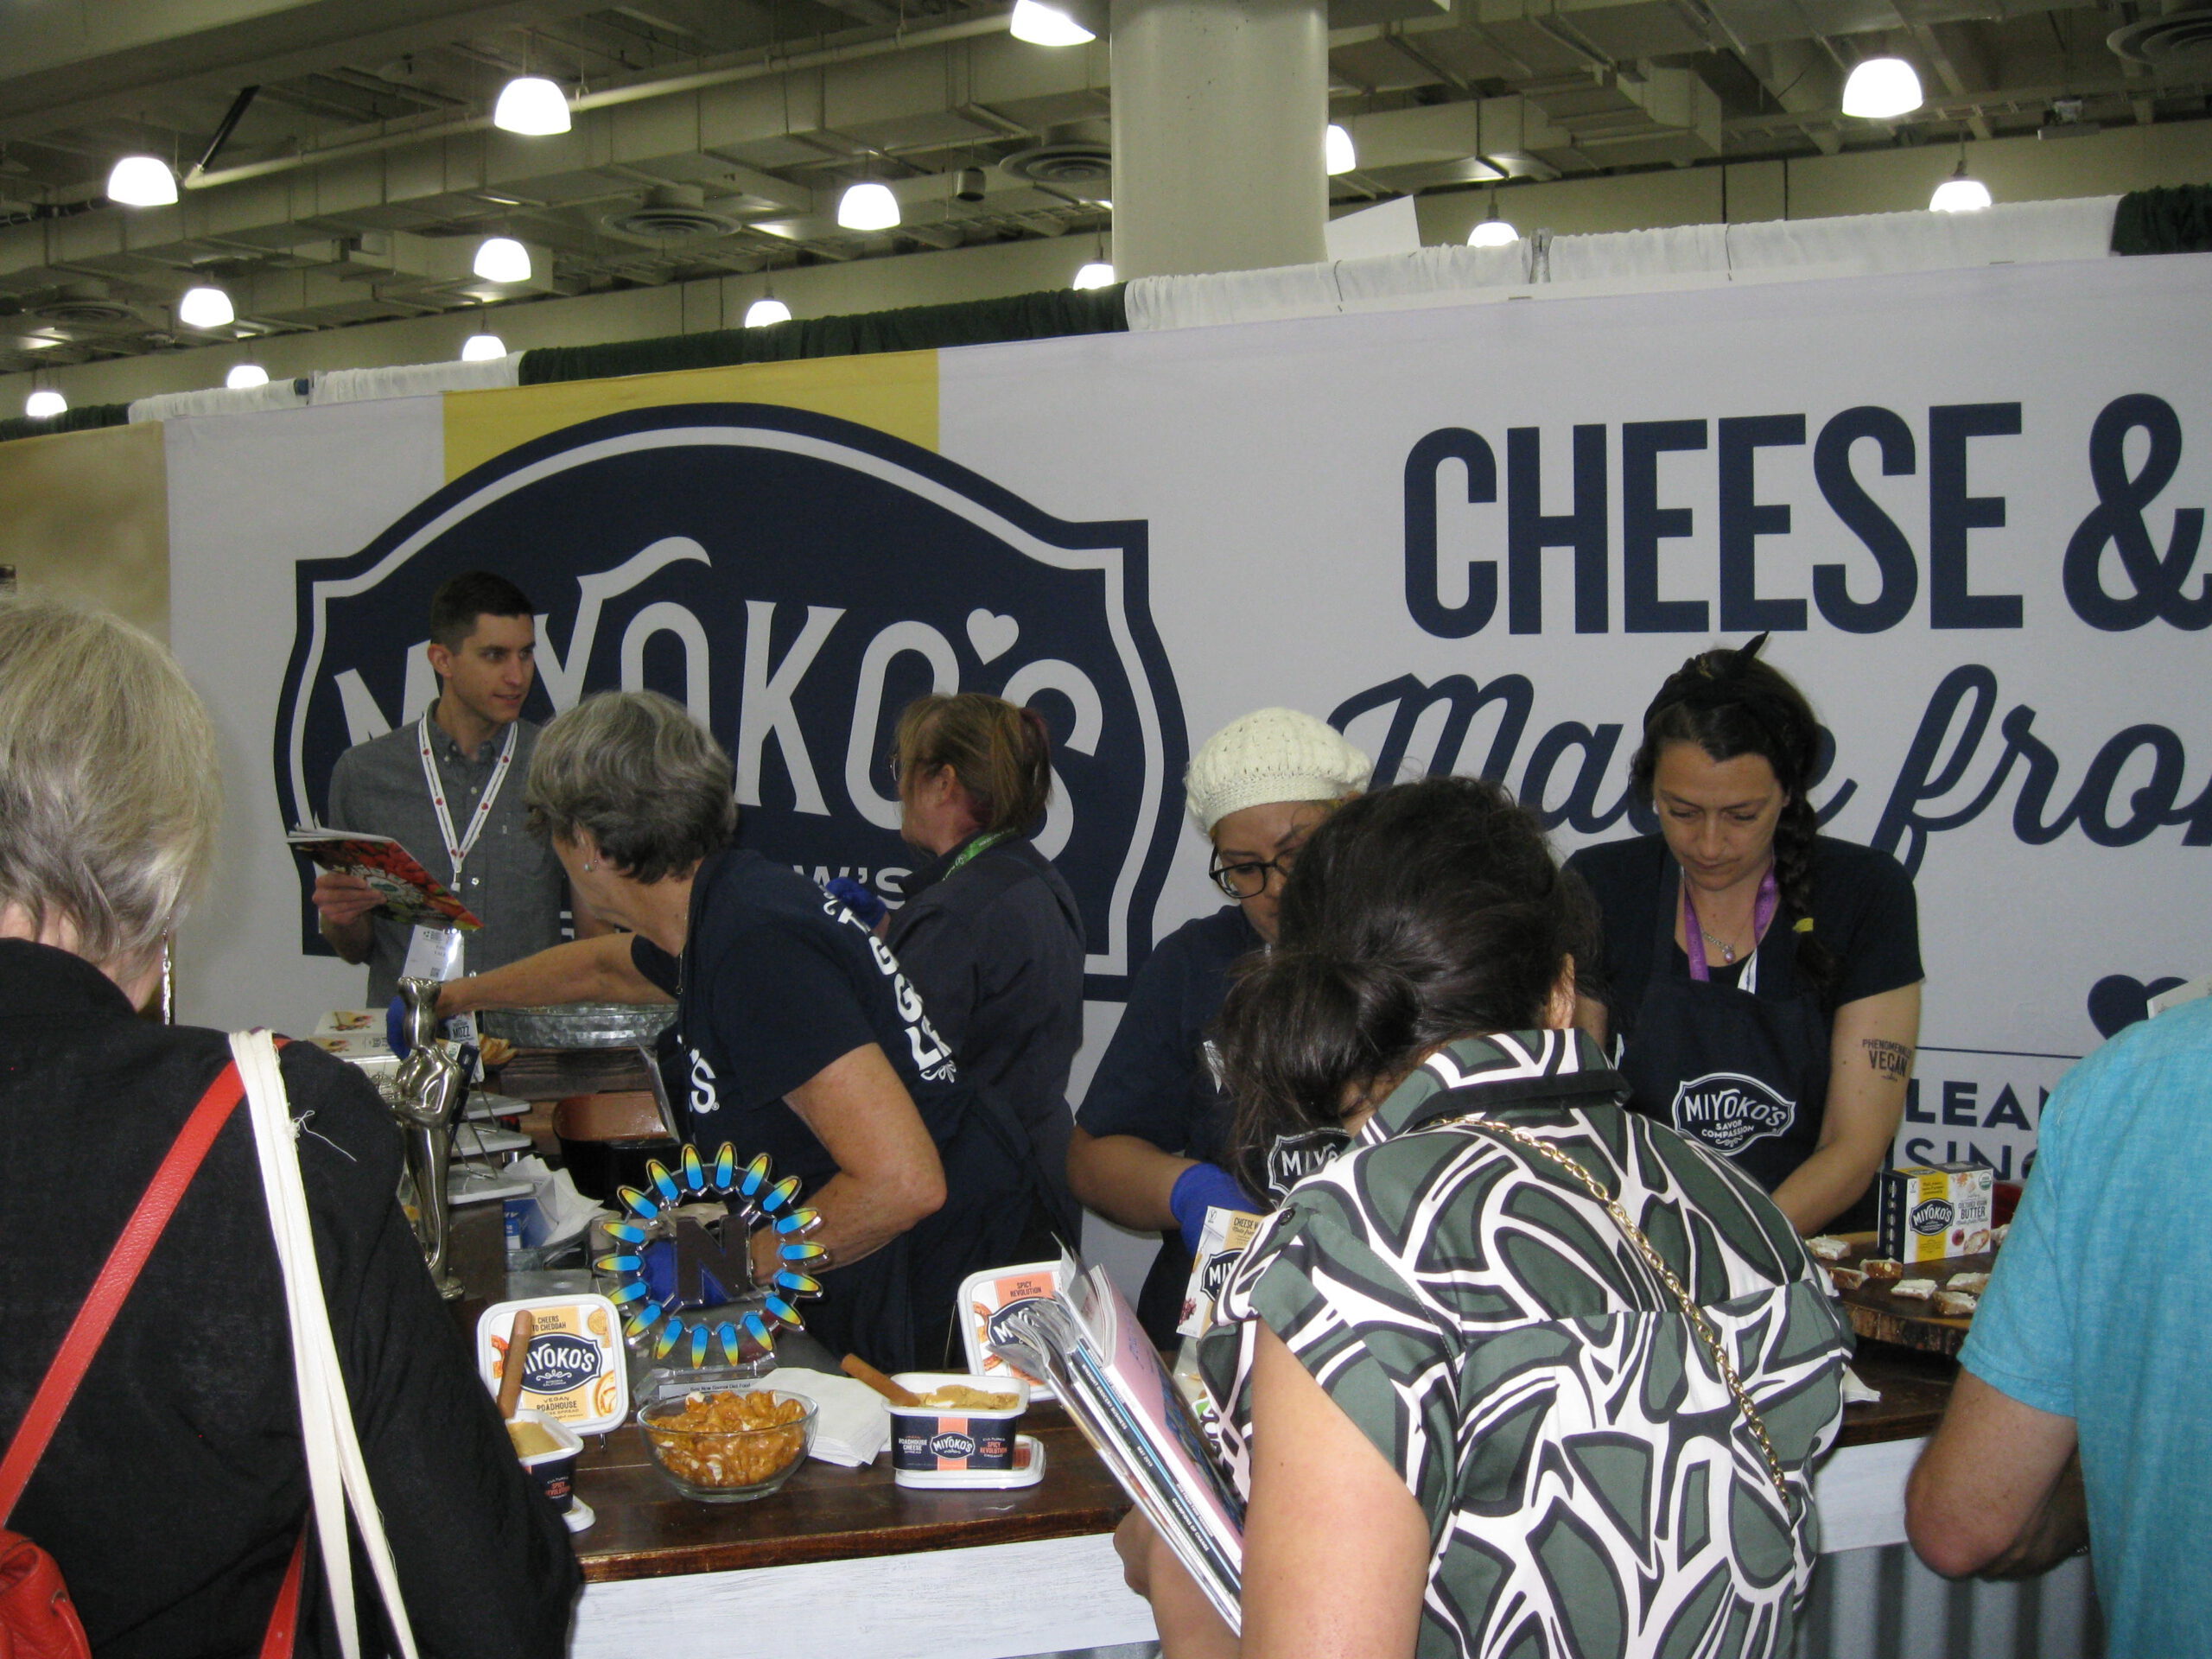 Attendees lined up to taste vegan cheese at the Miyoko's booth at the Plant Based World Conference and Expo.